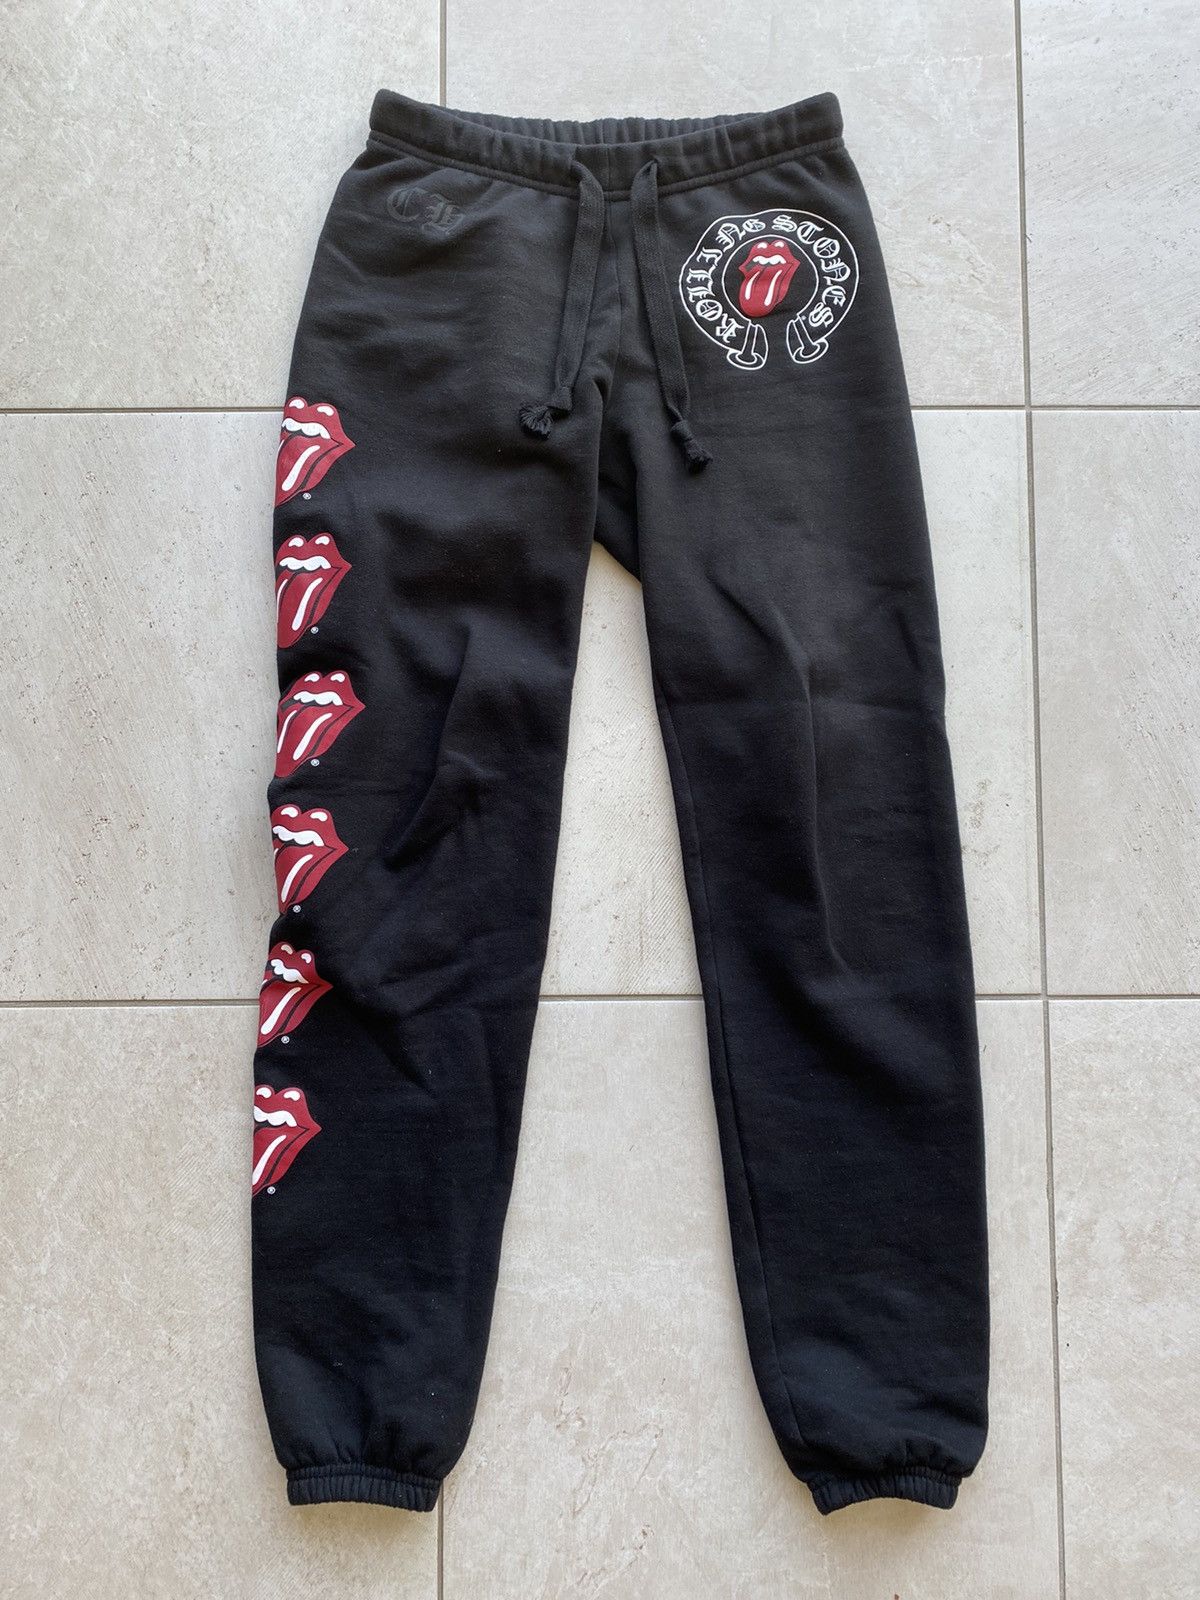 Chrome Hearts Chrome Hearts Rolling Stones Bottoms | Grailed